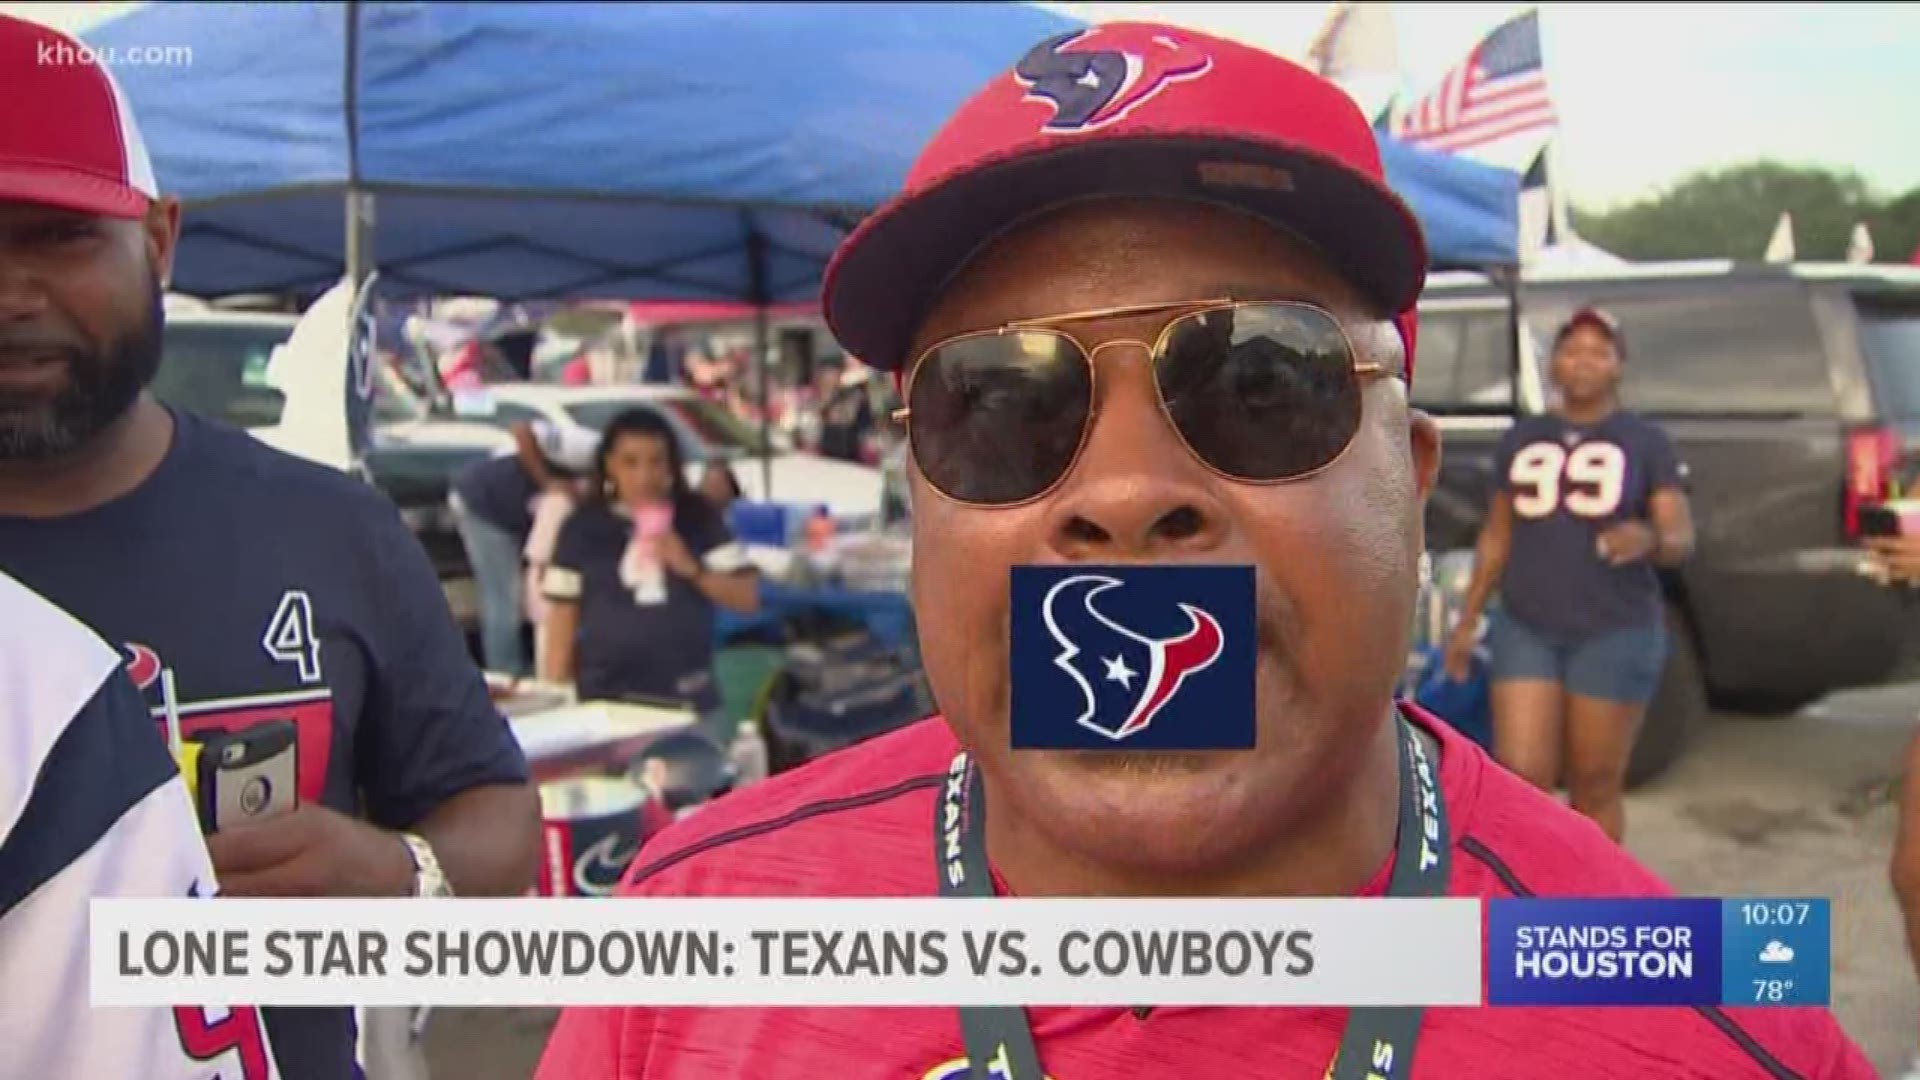 Lone Star Showdown: Check out the tailgate scene ahead of Texans vs.  Cowboys